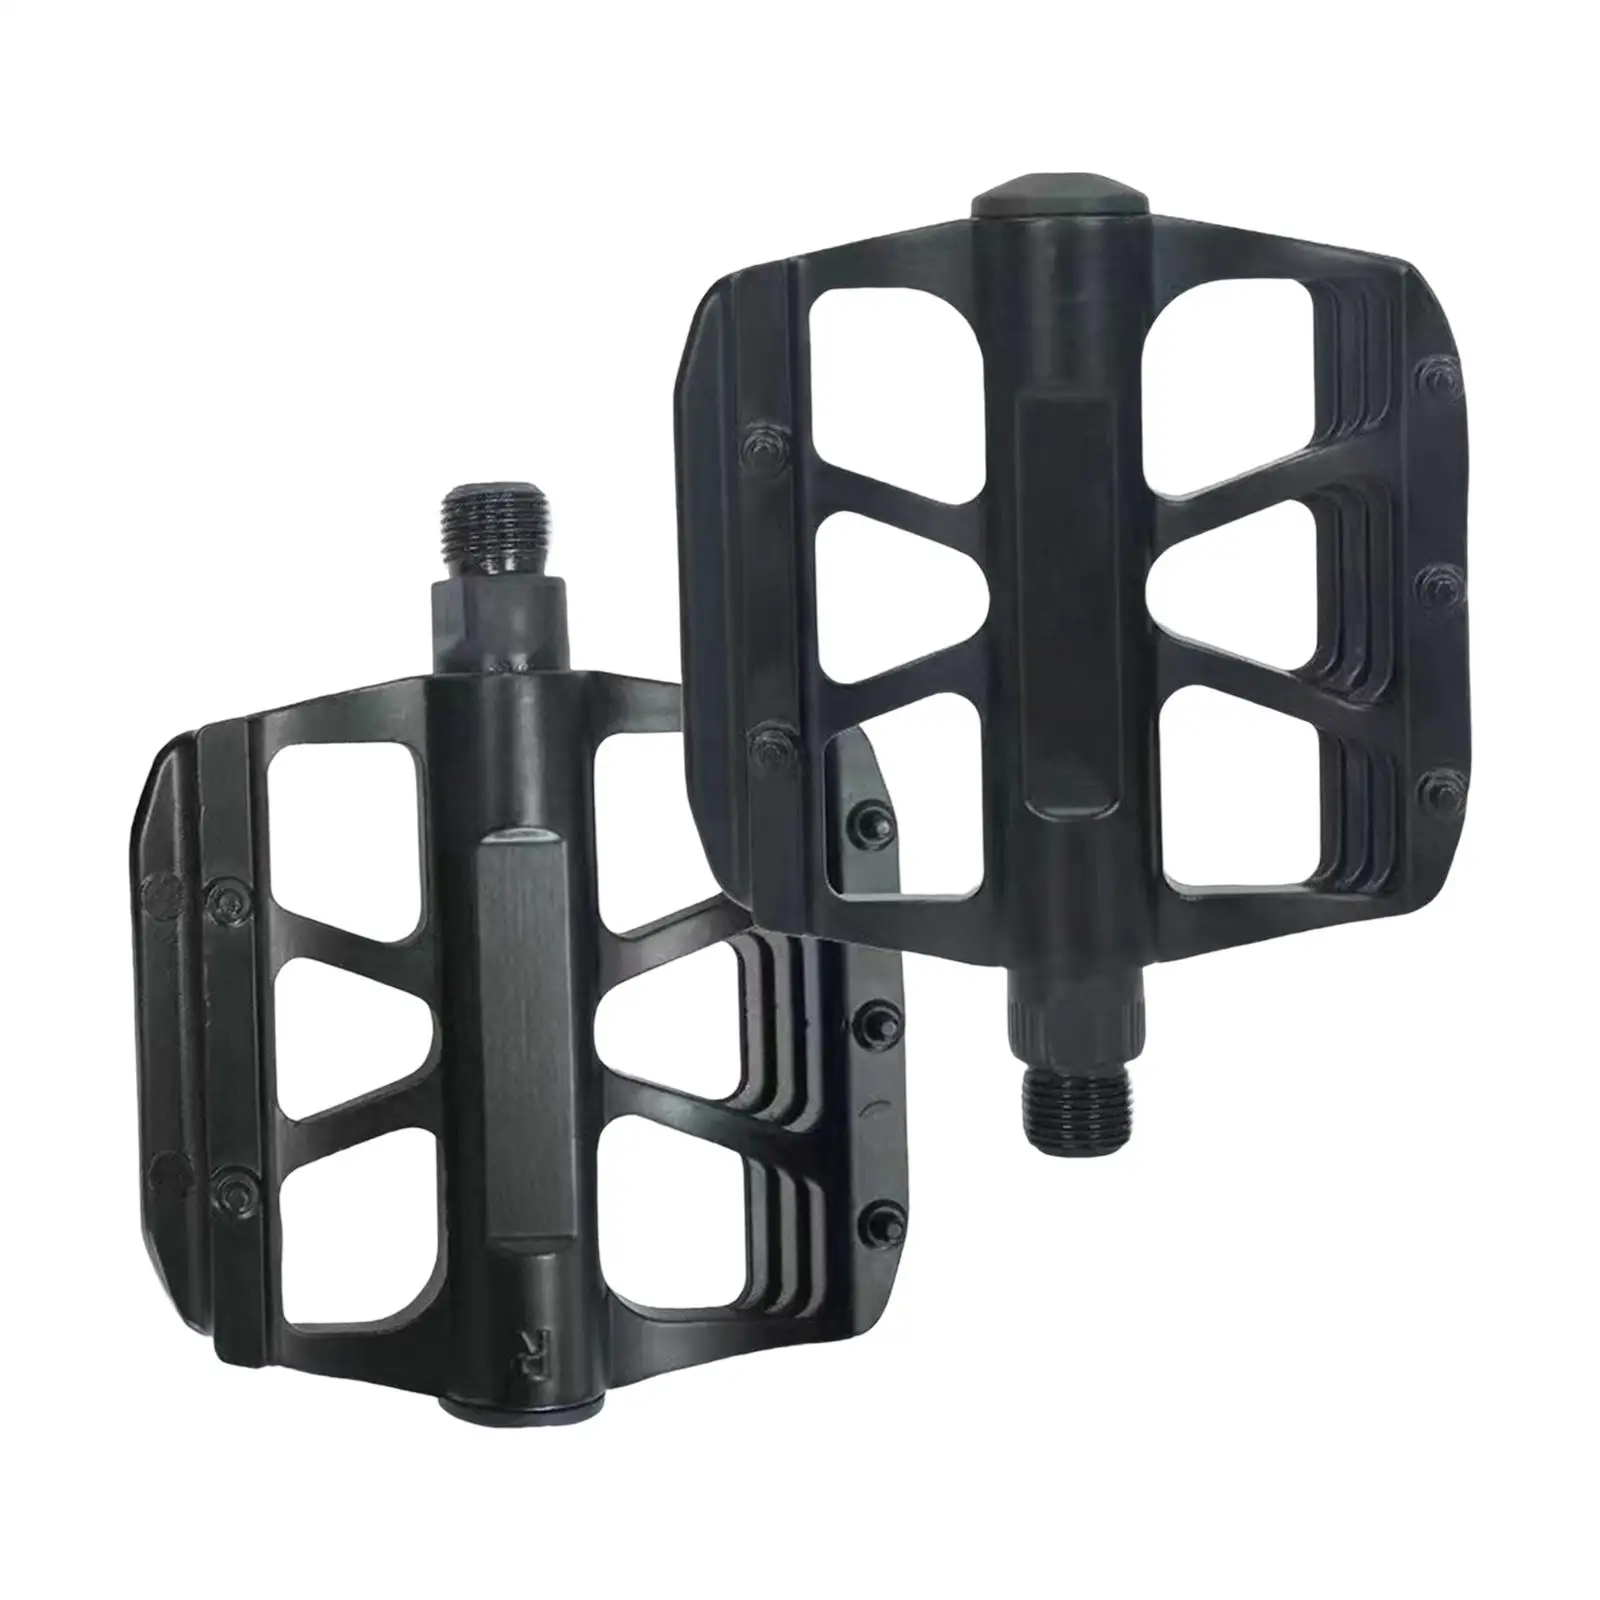 Bike Pedals Anti Slip Portable Durable Universal Cycling Pedals for Cycling Parts Travling Outdoor Biking Mountain Road Bikes